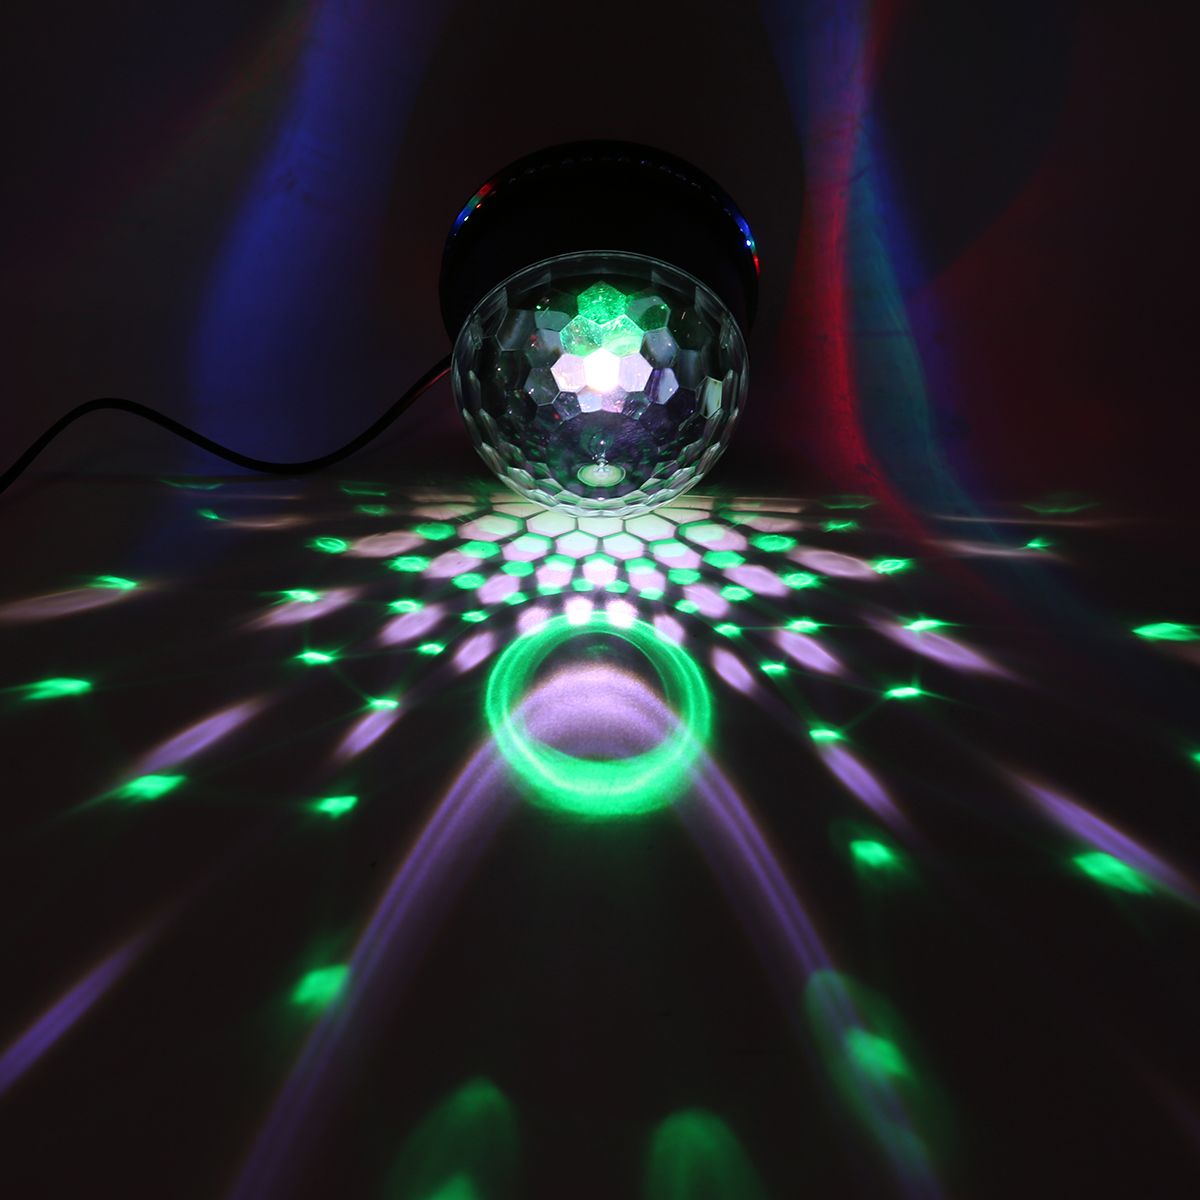 US-Plug-Remote-Sound-Activated-Control-LED-Crystal-Magic-Ball-Light-Party-KTV-1710525